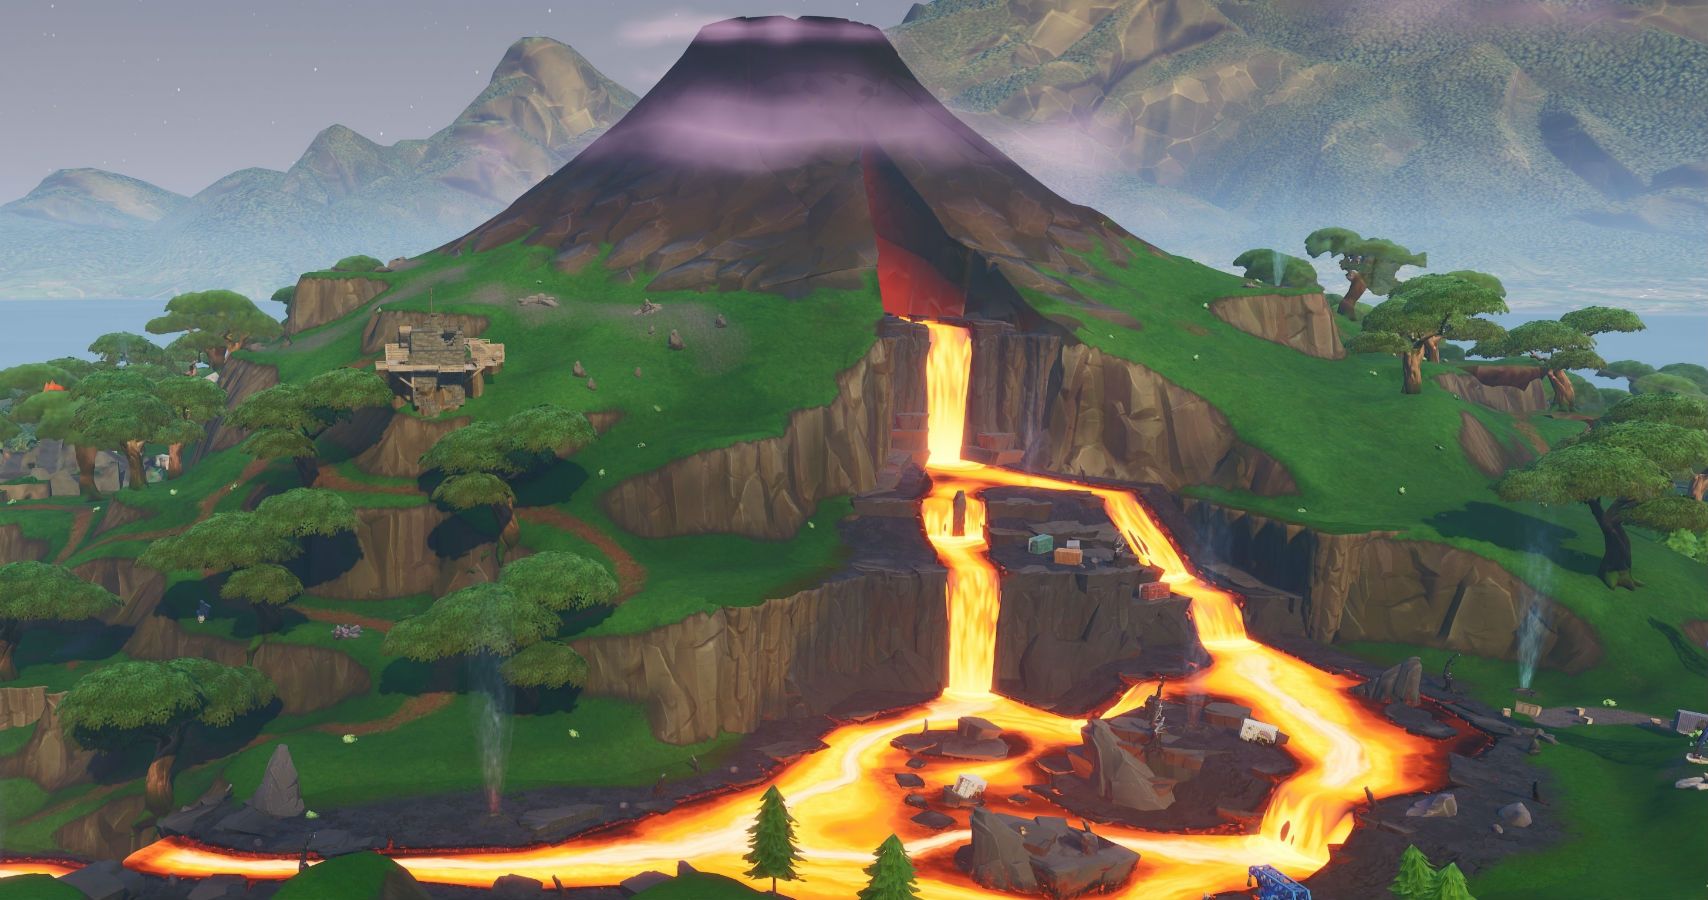 Ninja Says A New Fortnite Map Is Coming (For Creative Mode Unfortunately)